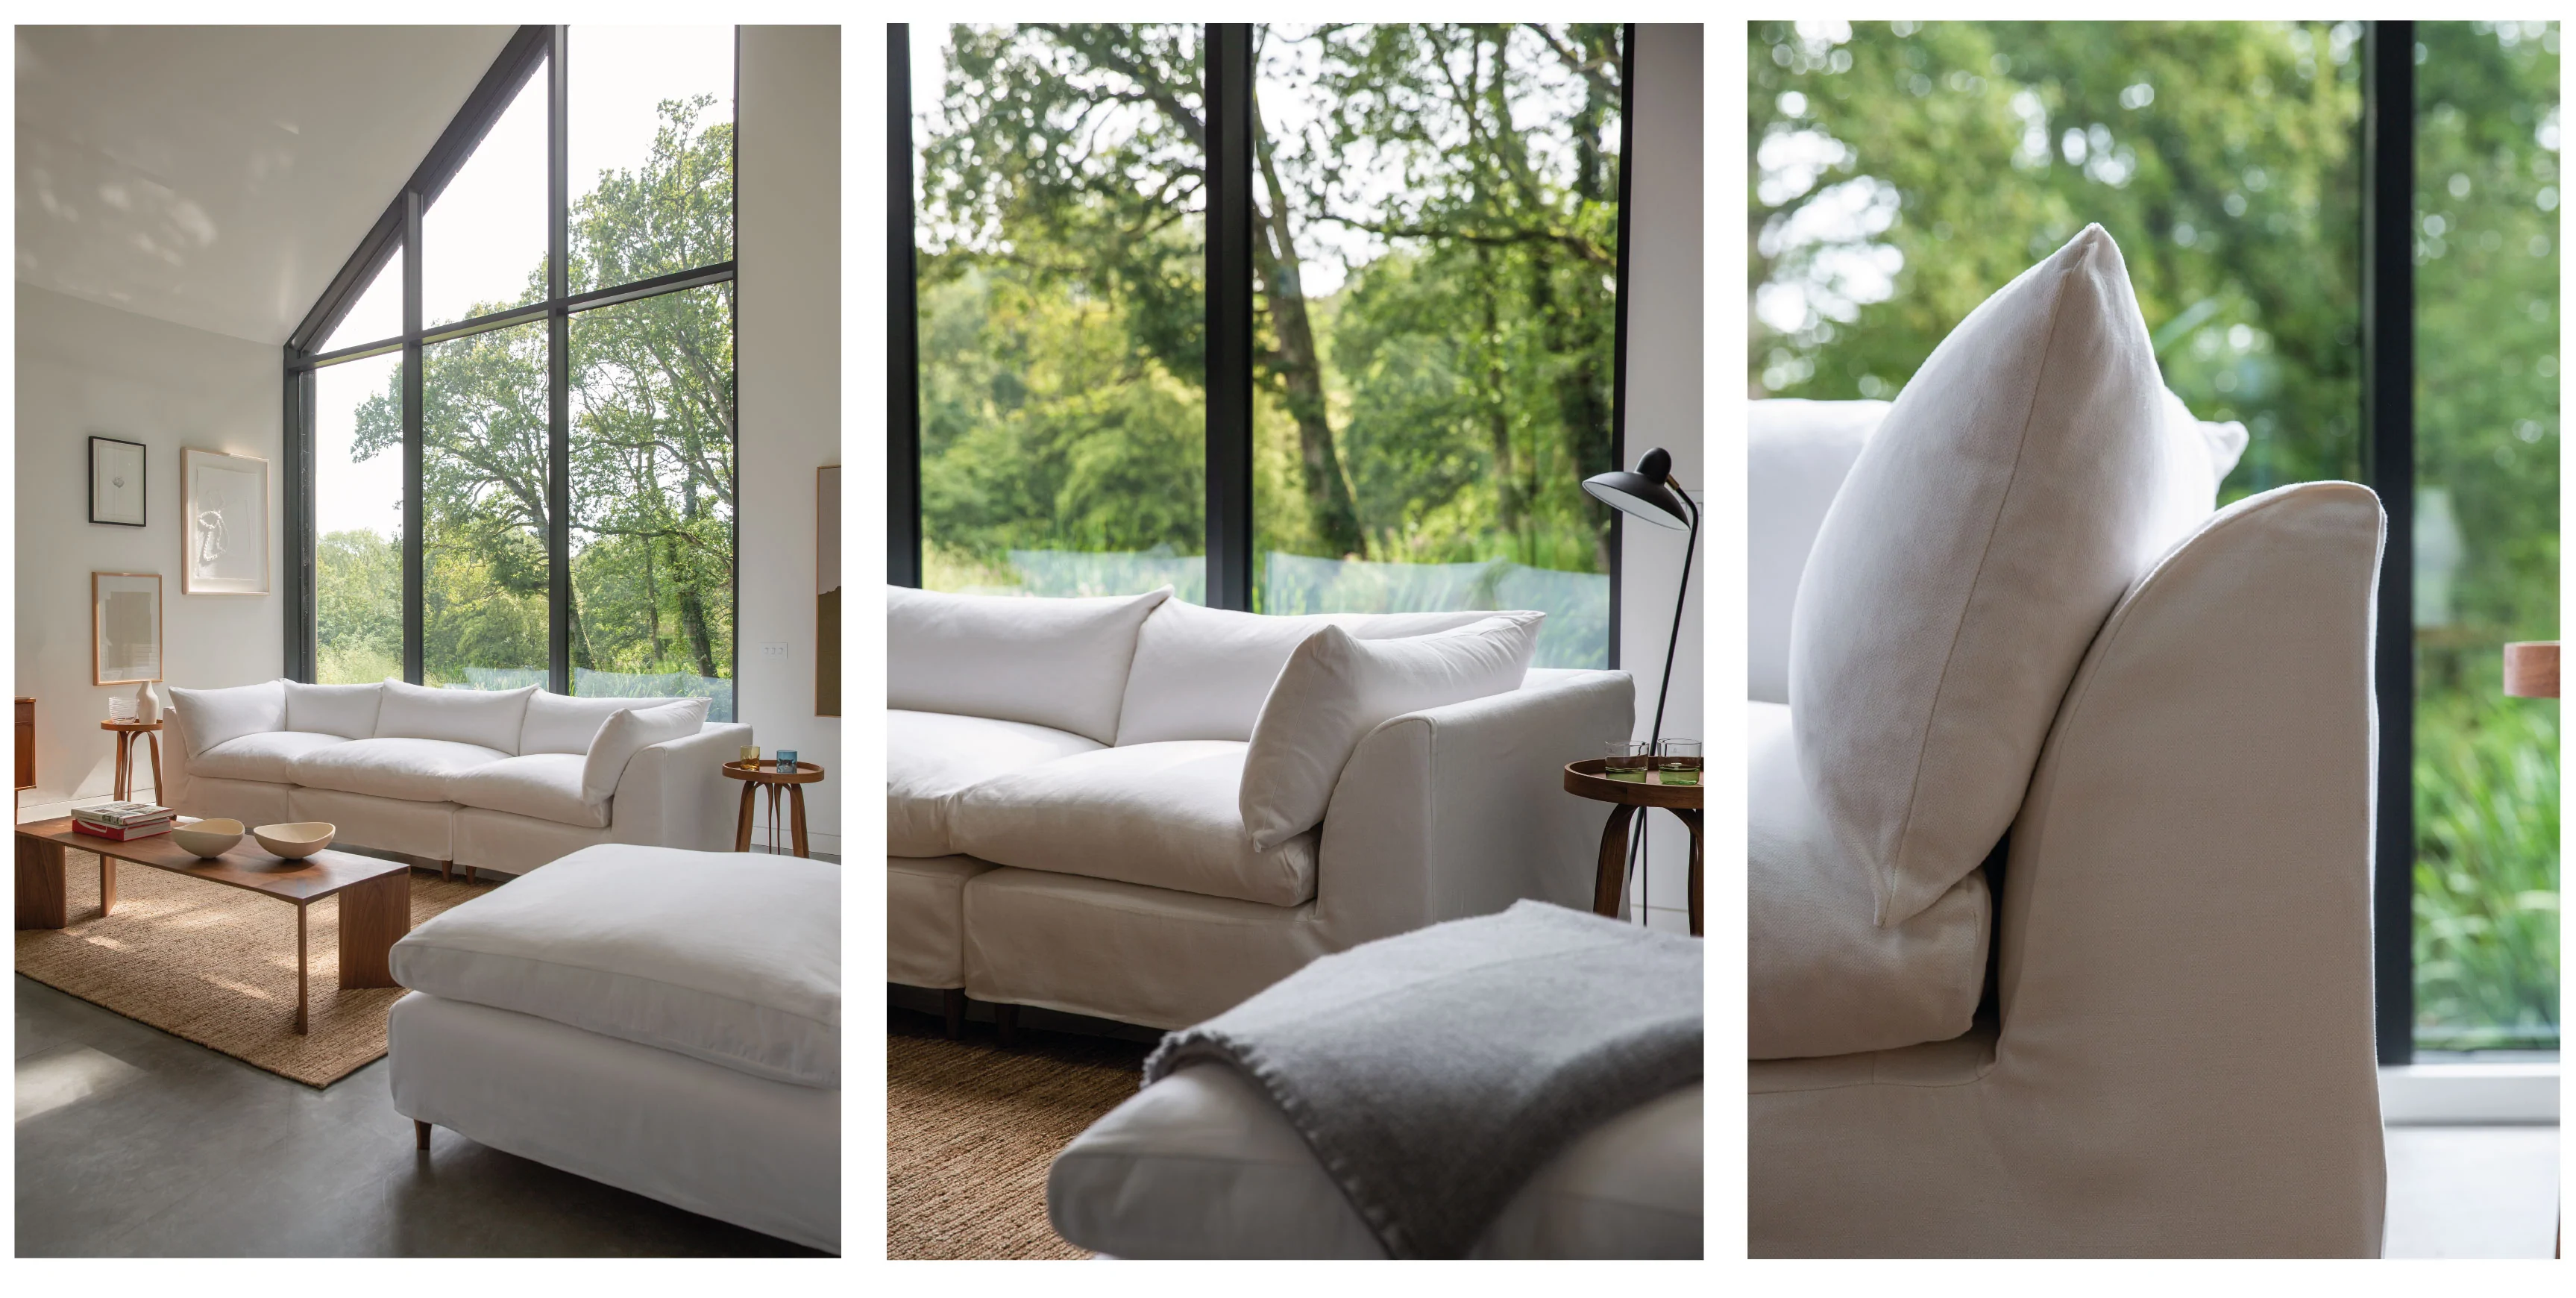 Orlando modular sofa and footstool by Maker and Son in a modern lounge room setting.